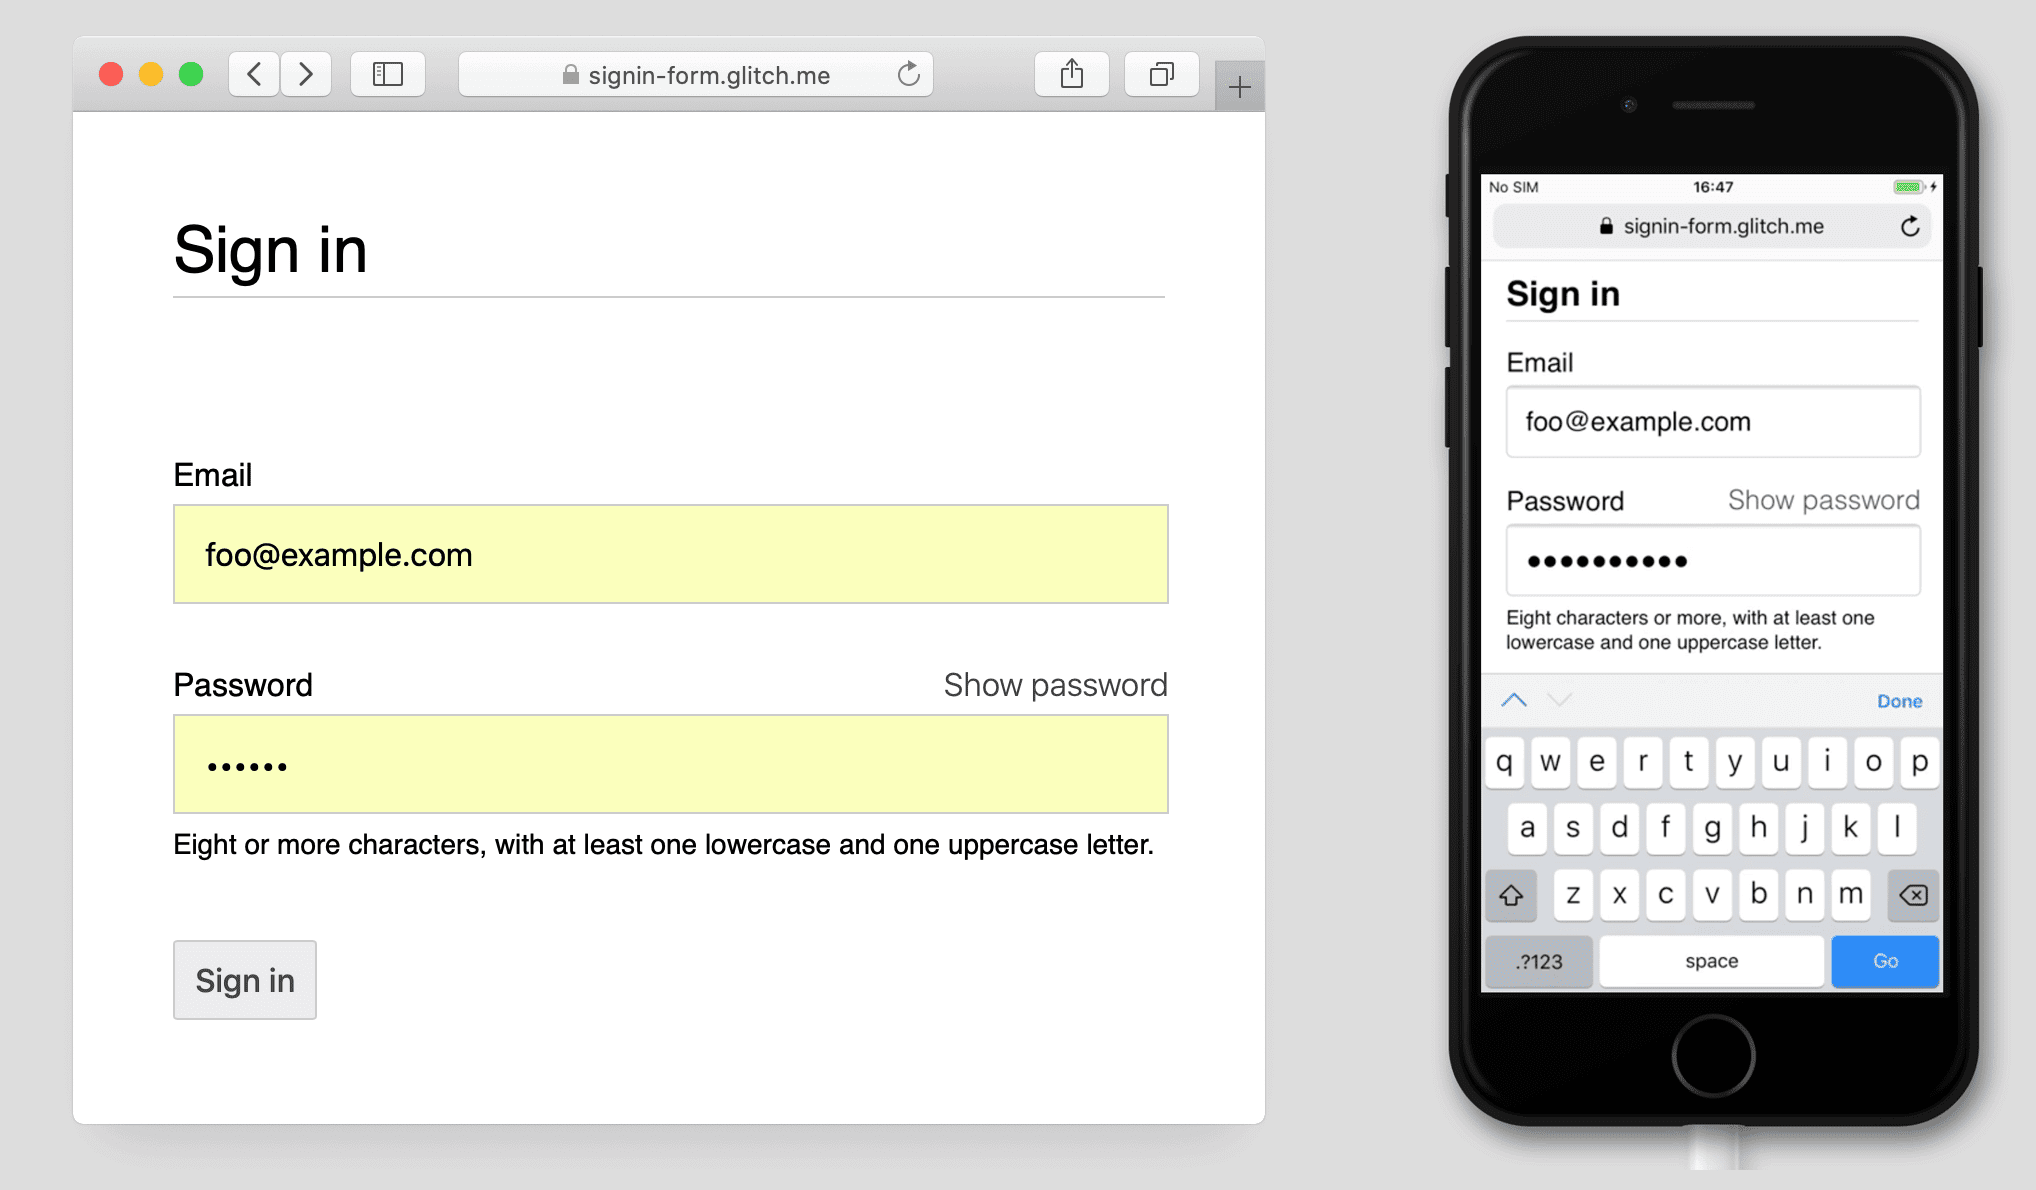 Screenshots of sign-in form with Show password text 'button', in Safari on Mac and on iPhone 7.